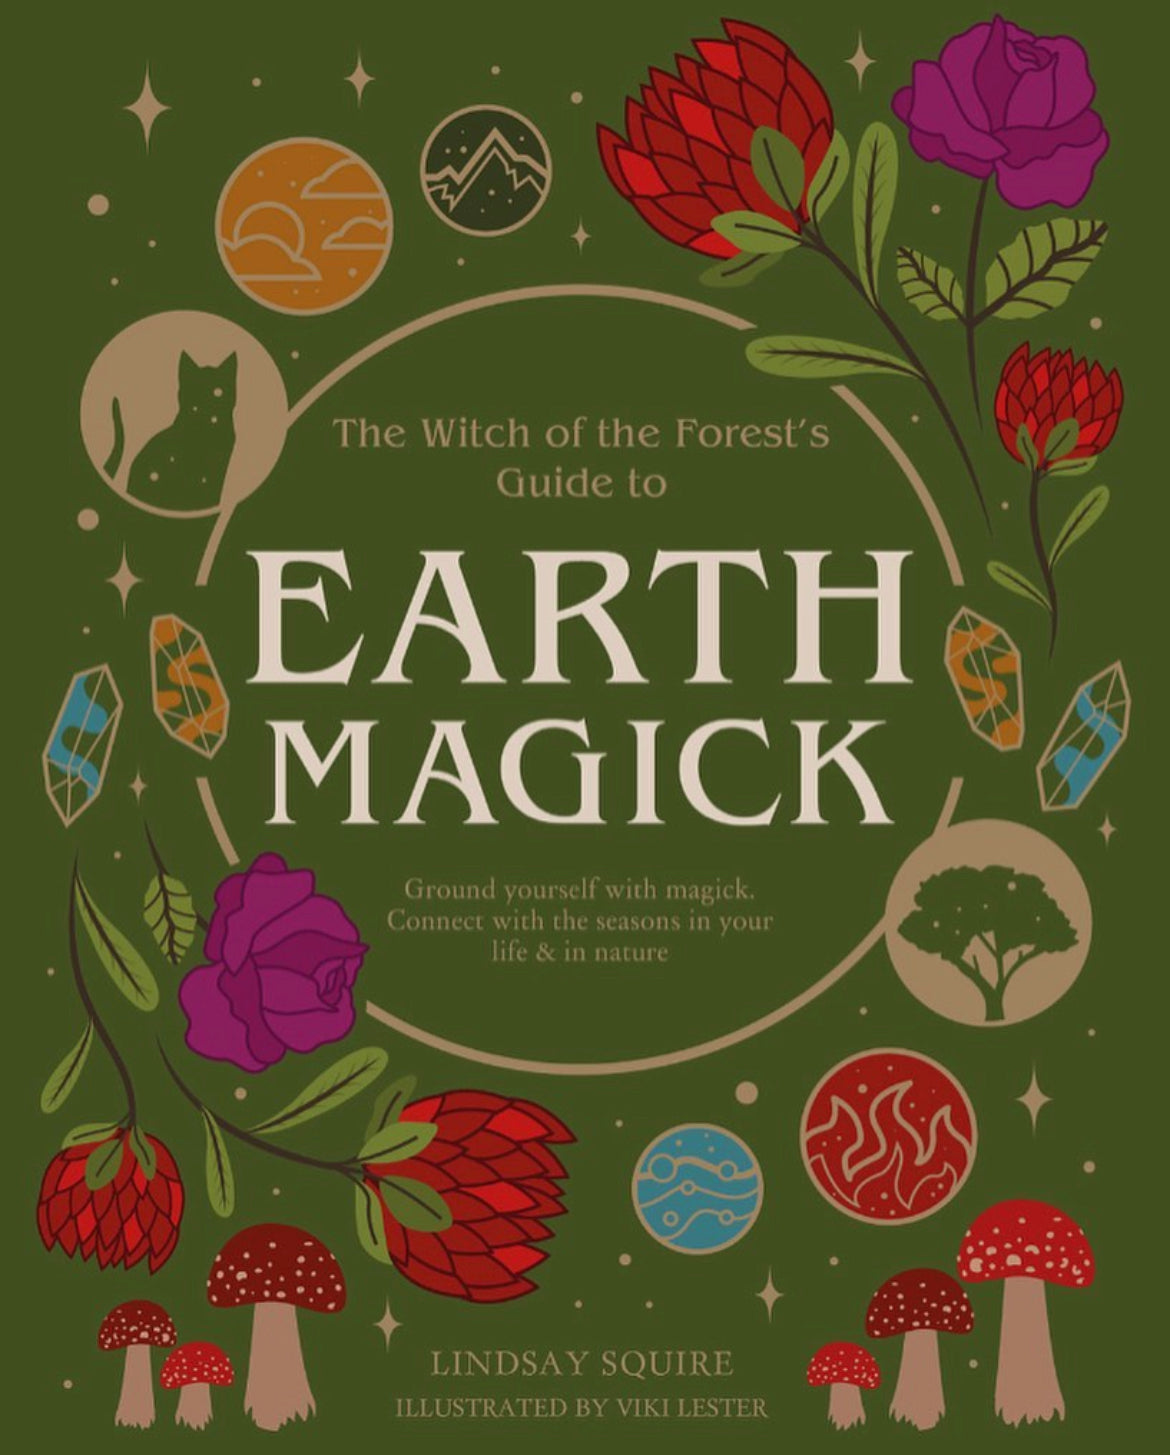 Earth Magick: Ground Yourself With Magick. Connect With The Seasons In Your Life & In Nature